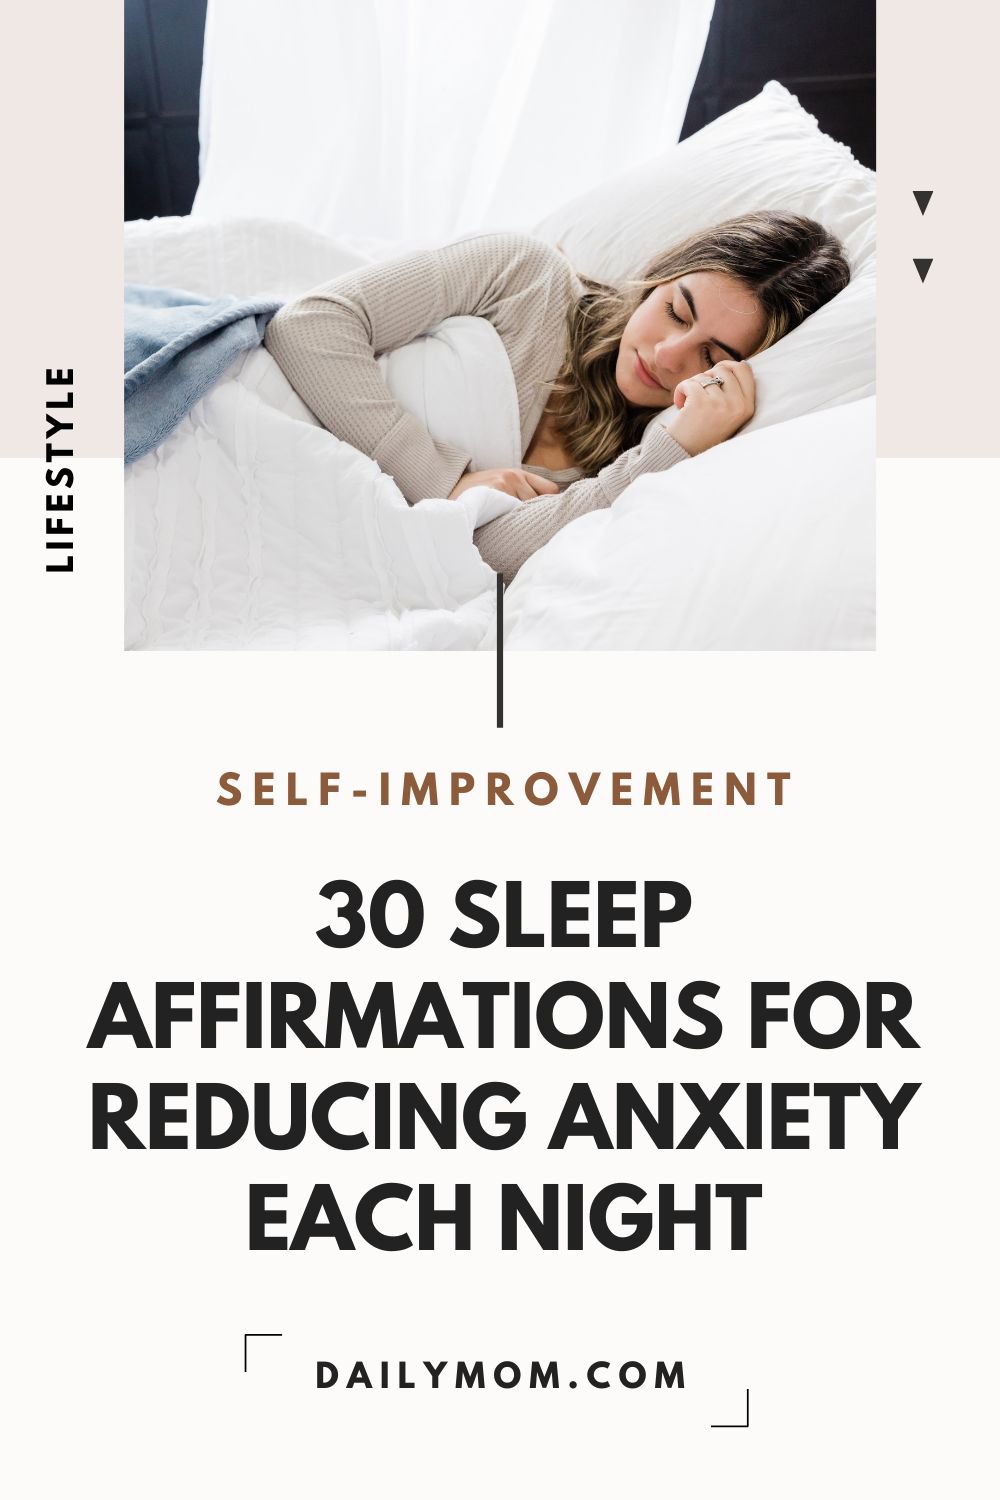 30 Sleep Affirmations For Reducing Anxiety Each Night